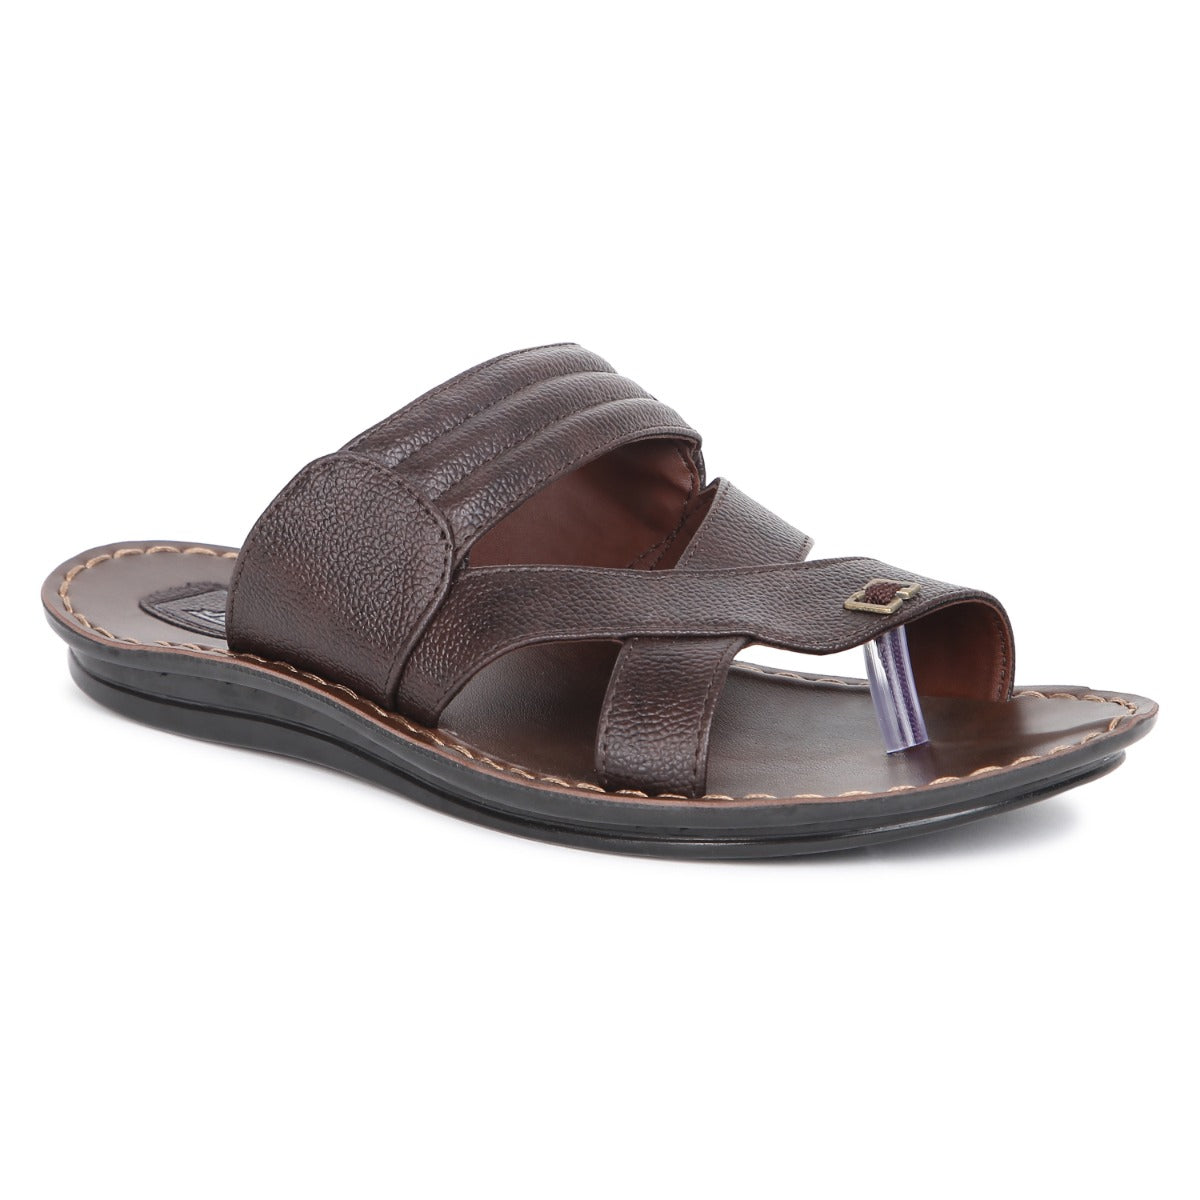 Paragon PUK2203G Men Stylish Sandals | Comfortable Sandals for Daily Outdoor Use | Casual Formal Sandals with Cushioned Soles